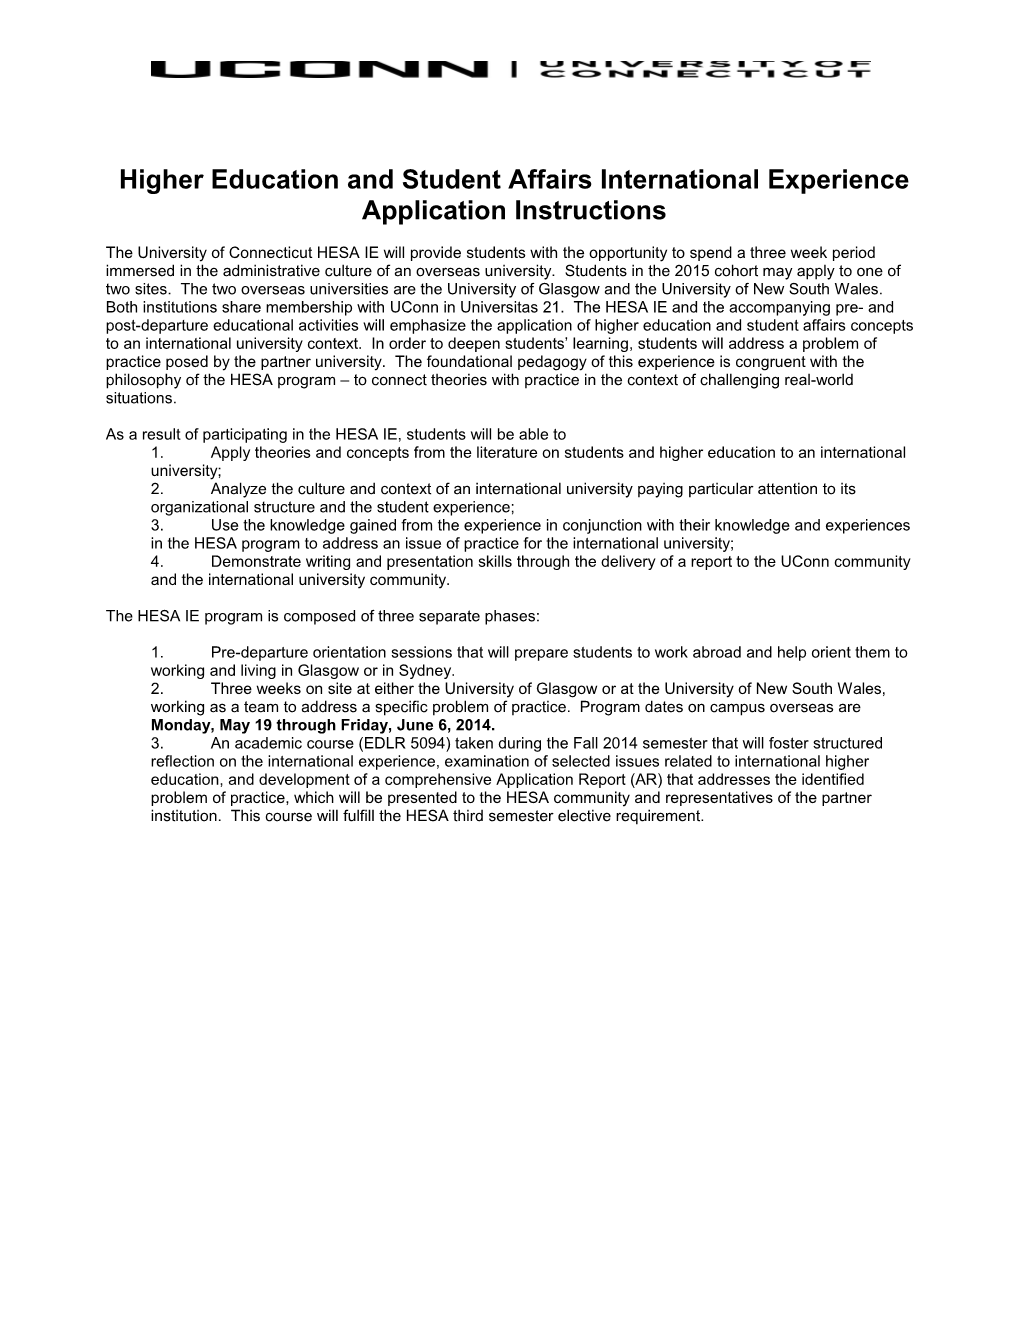 Higher Education and Student Affairs International Experience